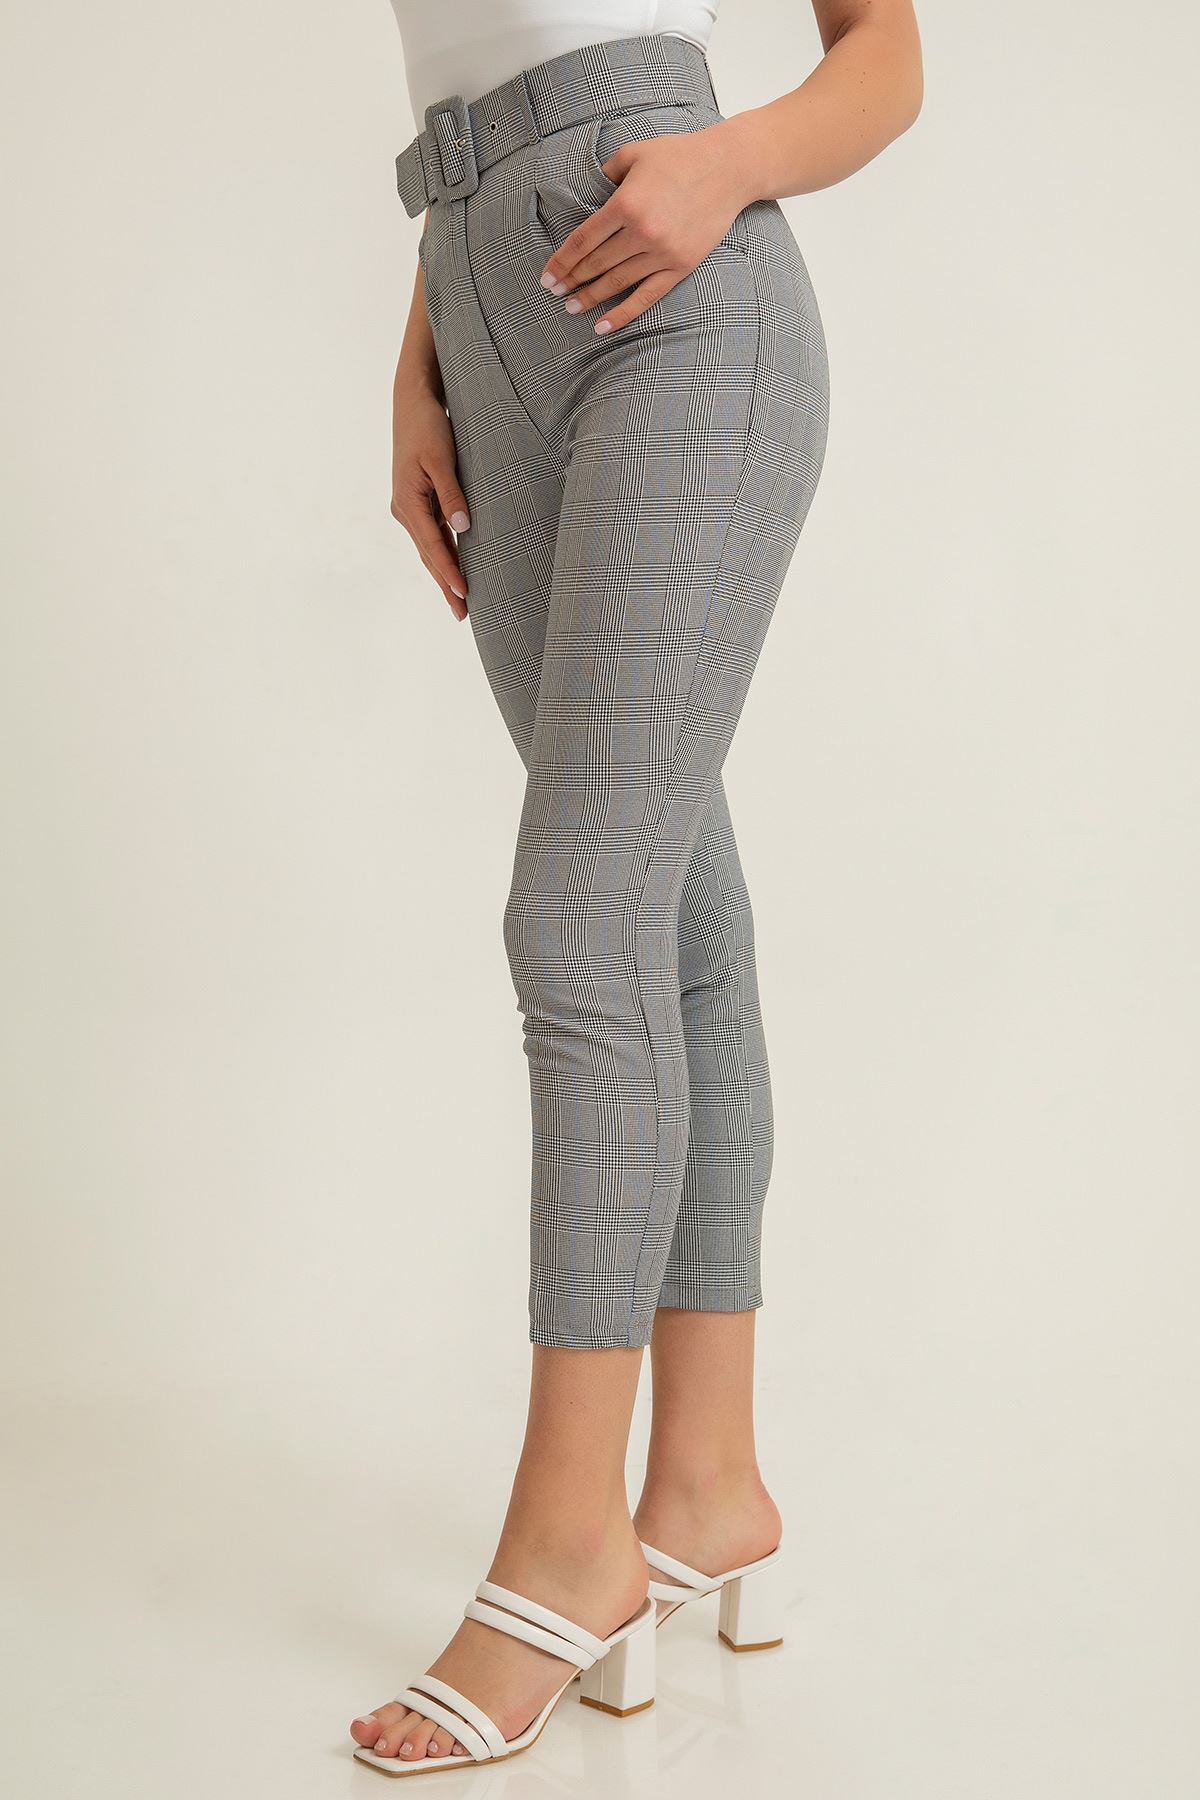 Plaid Fabric Ankle Length Classical Striped Women'S Trouser With Belt - Navy Blue 